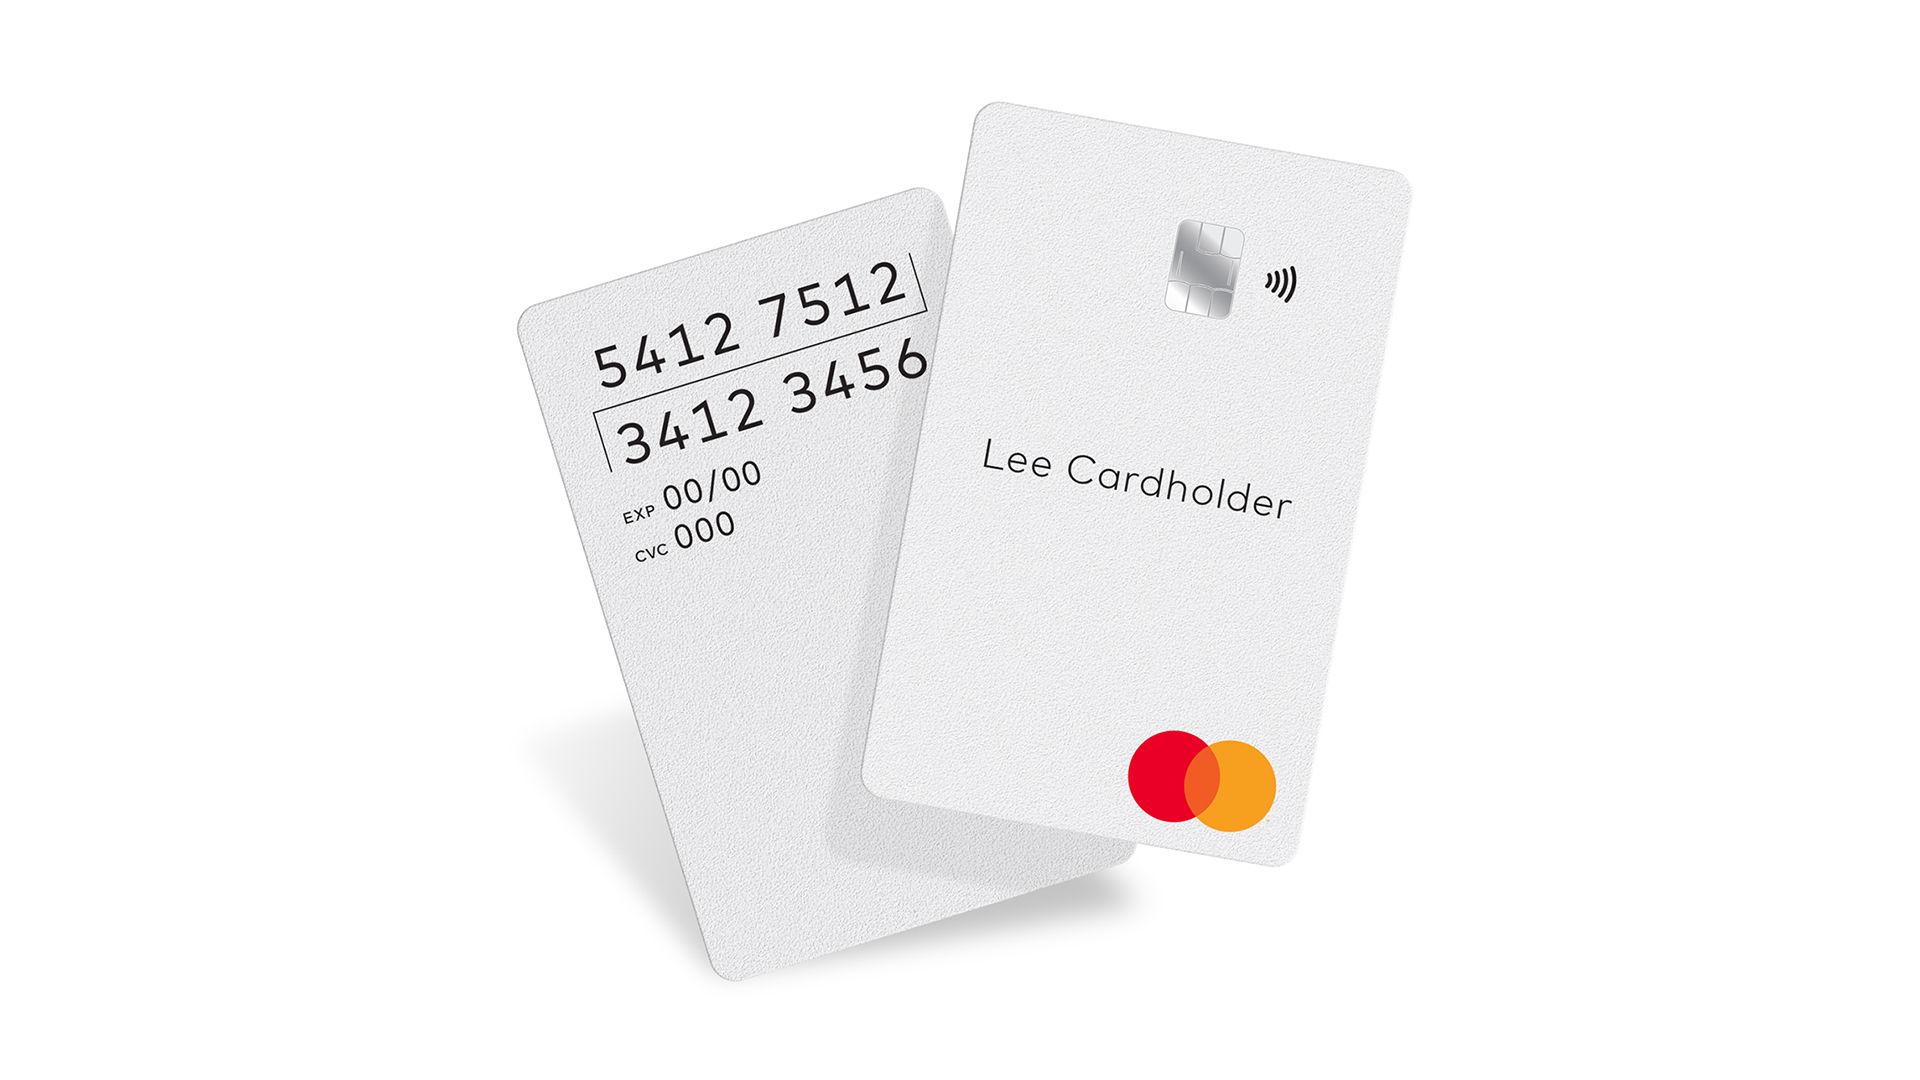 Mastercard's new stripe-less credit cards